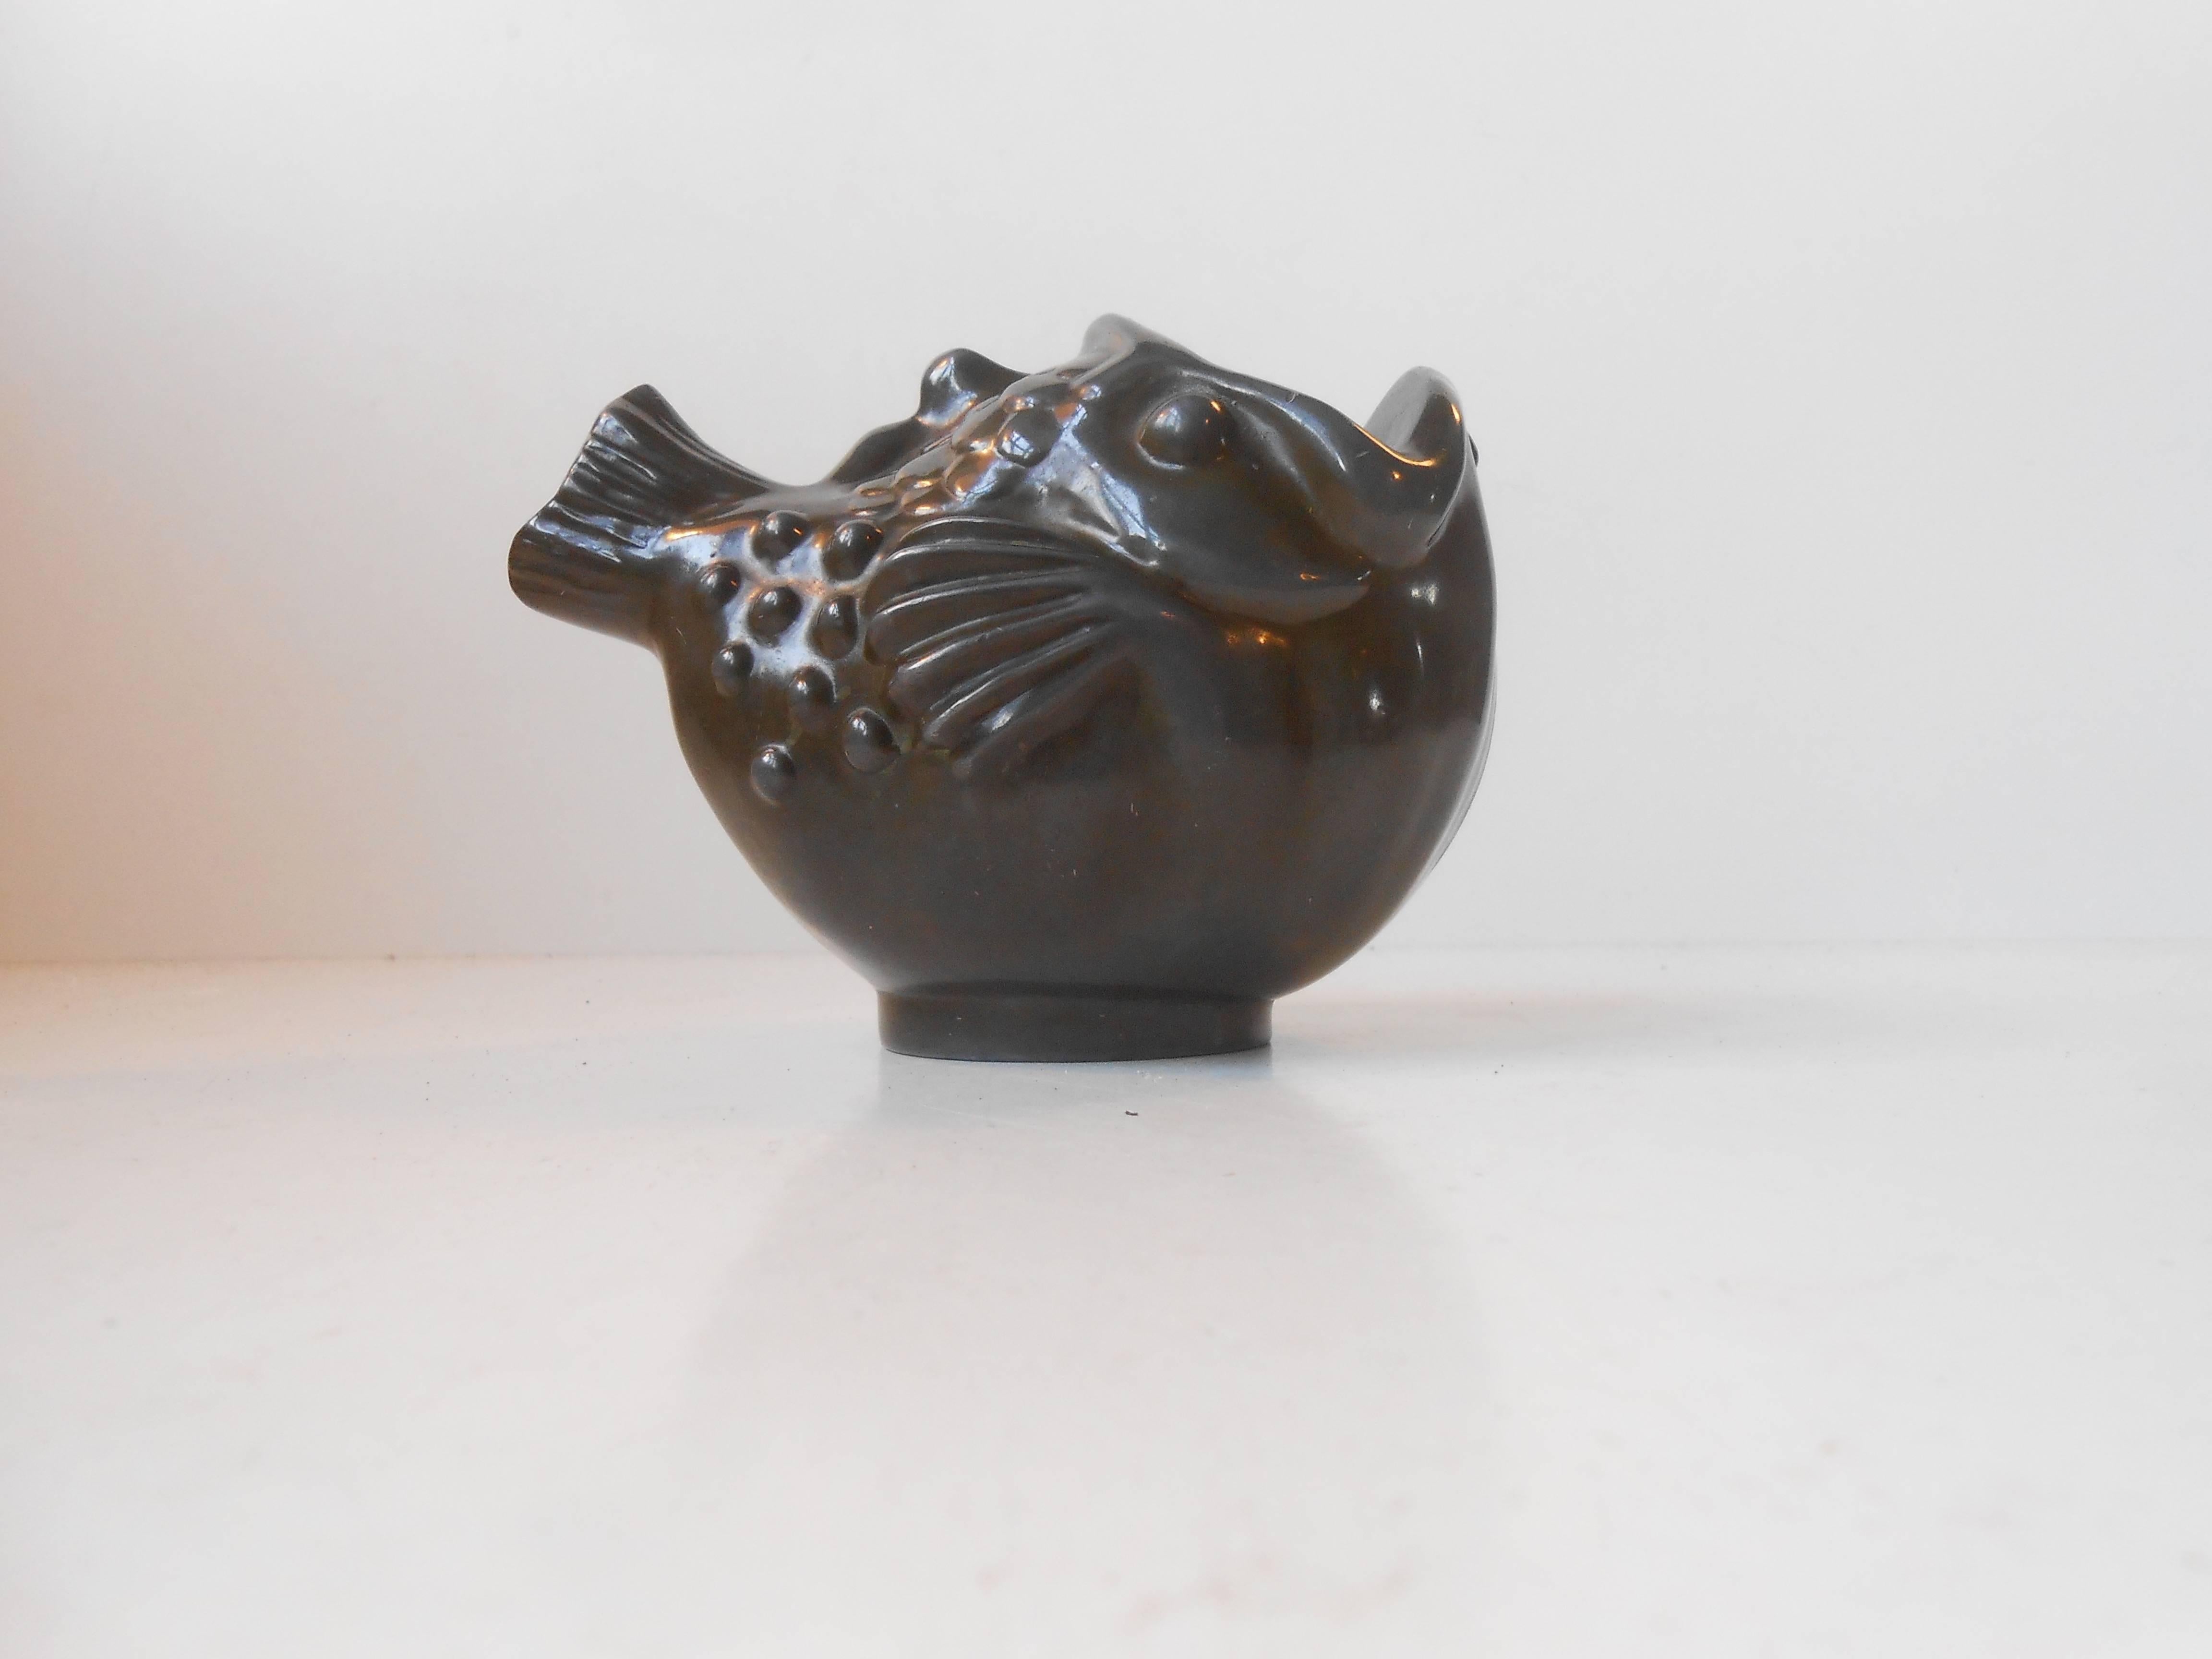 Beautiful little chubby fish-vase by Just Andersen. Made of his own invention, disko metal. Stamped: Just, Denmark, 1389 (design number). Made during the 1930s or early 1940s. Measurements: Length 5 inches, height 4 inches.